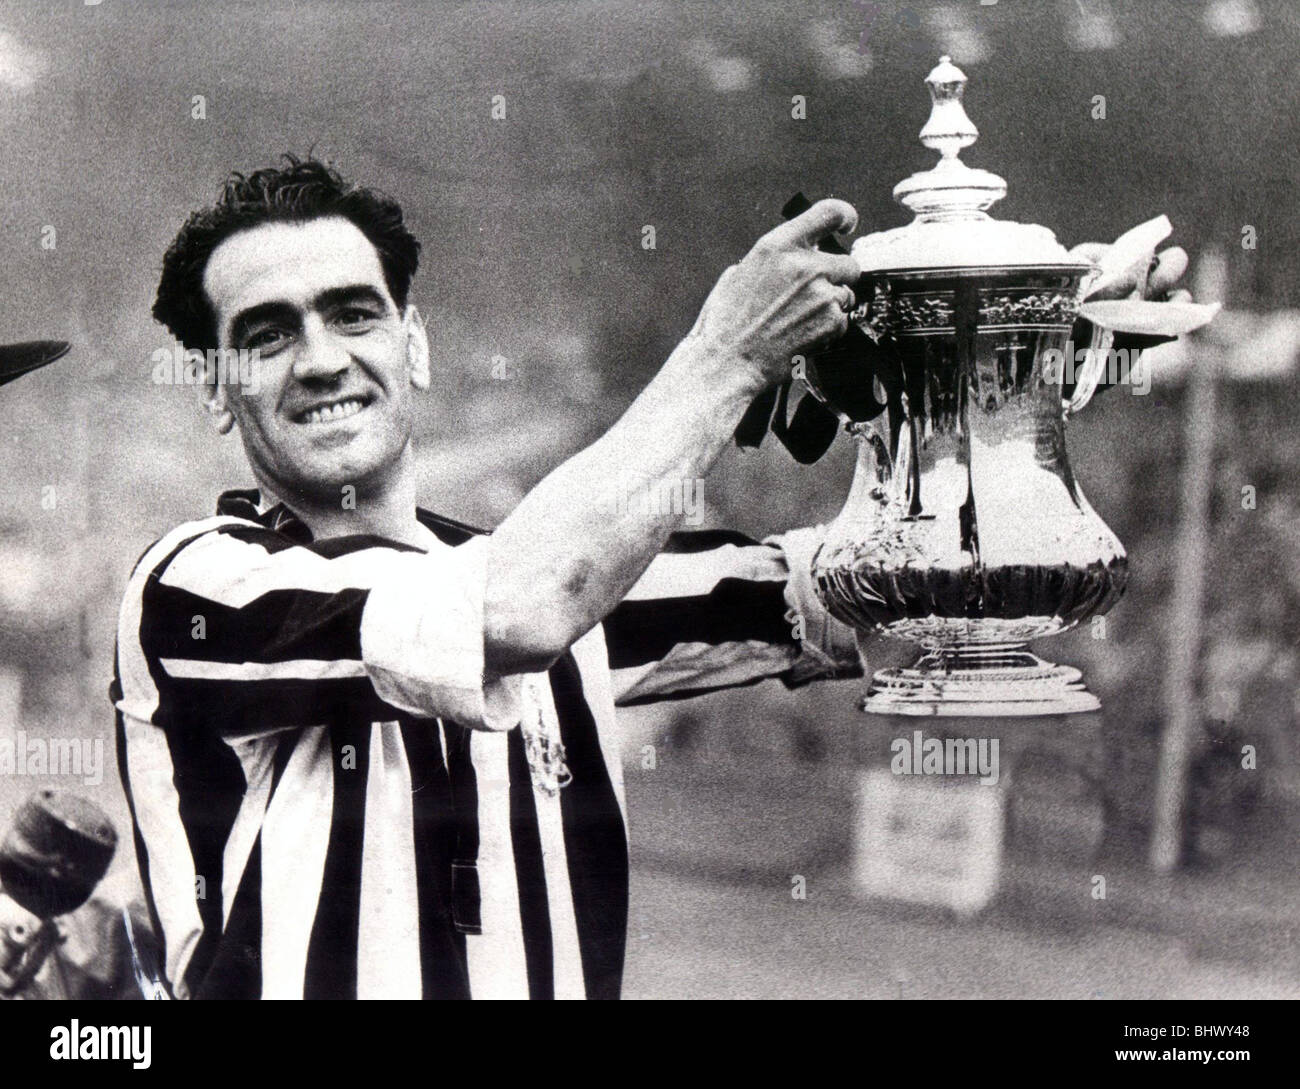 FA Cup Final 1952. Newcastle United vs Arsenal. 03/05/1952. Joe Harvey holding the FA Cup after Newcastle's victory over Arsenal. Skipper Joe Harvey shows off the trophy to the cameras after the final whistle. Little did he know that he’d be back again next year. Stock Photo